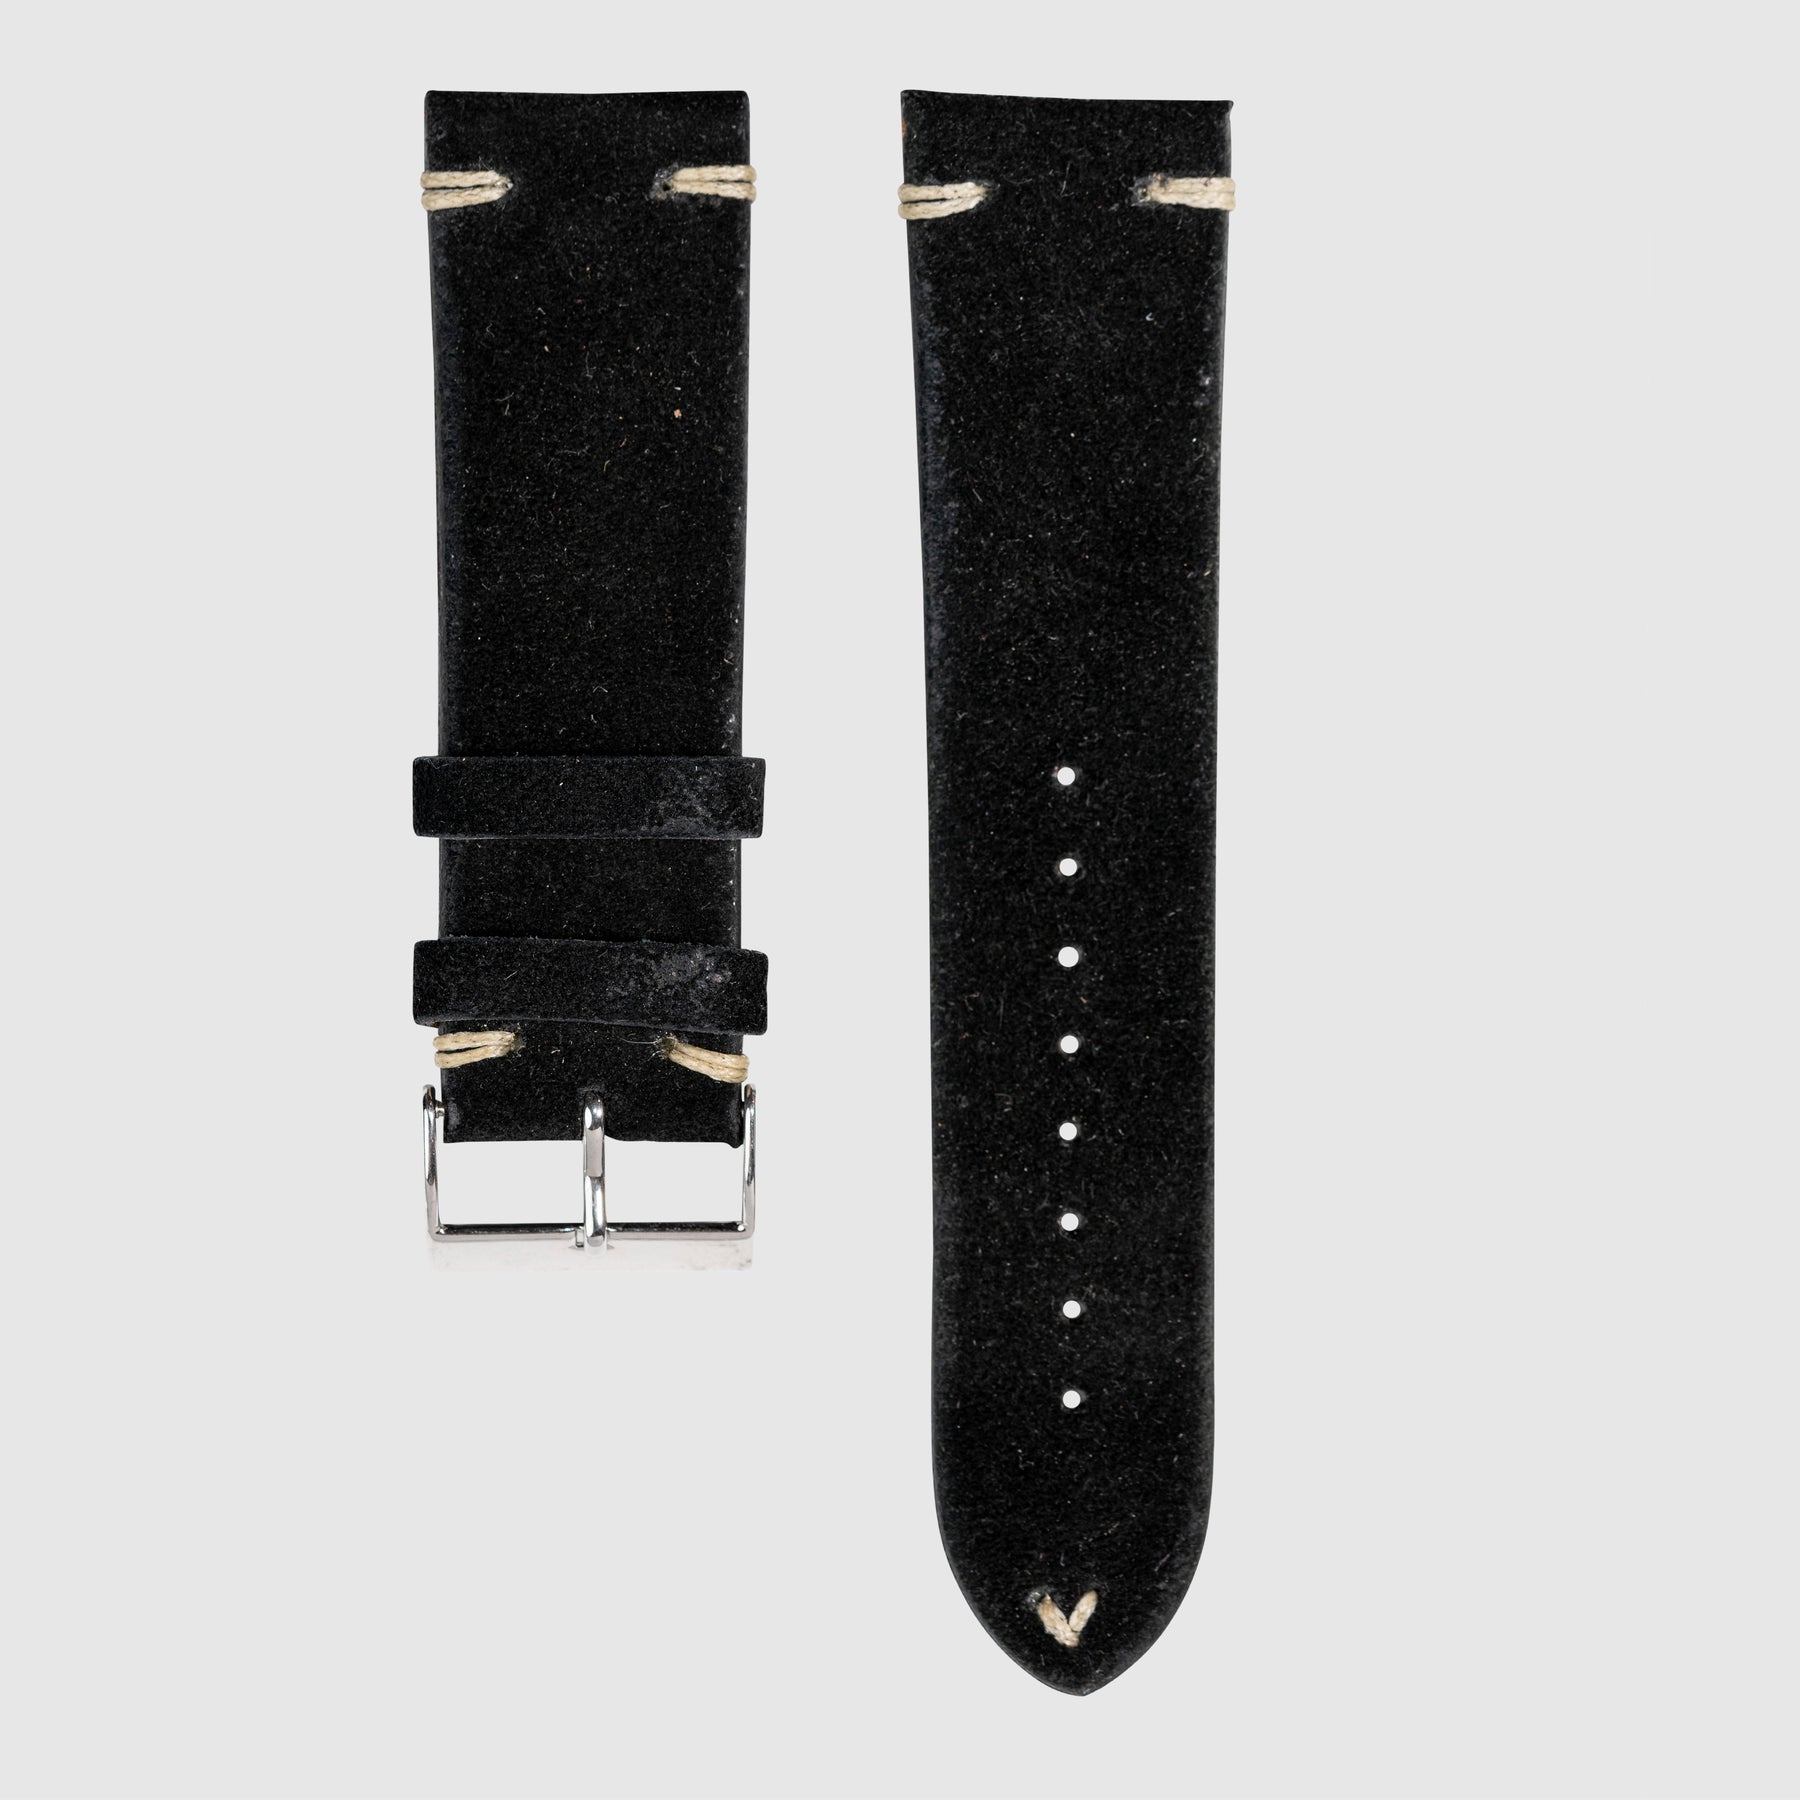 Vintage Straps Suede with White Stitching (Multiple Colors & Sizes)